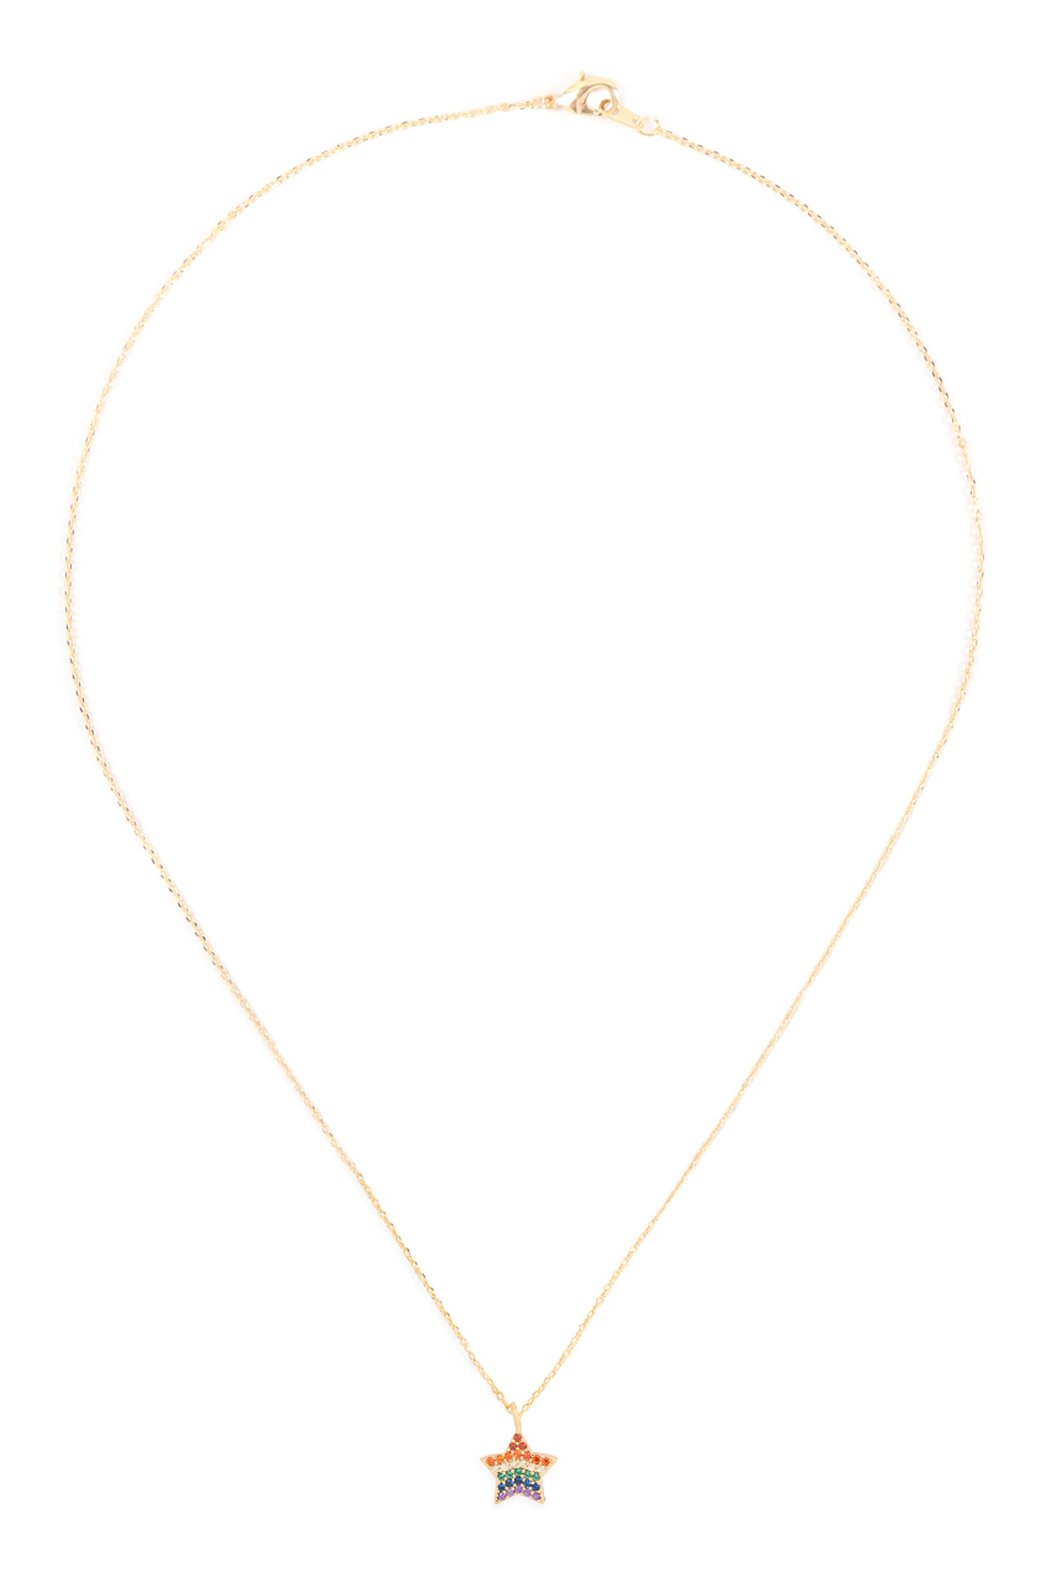 Hdnd2n203 - Star Zirconia Pendant Necklace - LOLA LUXE